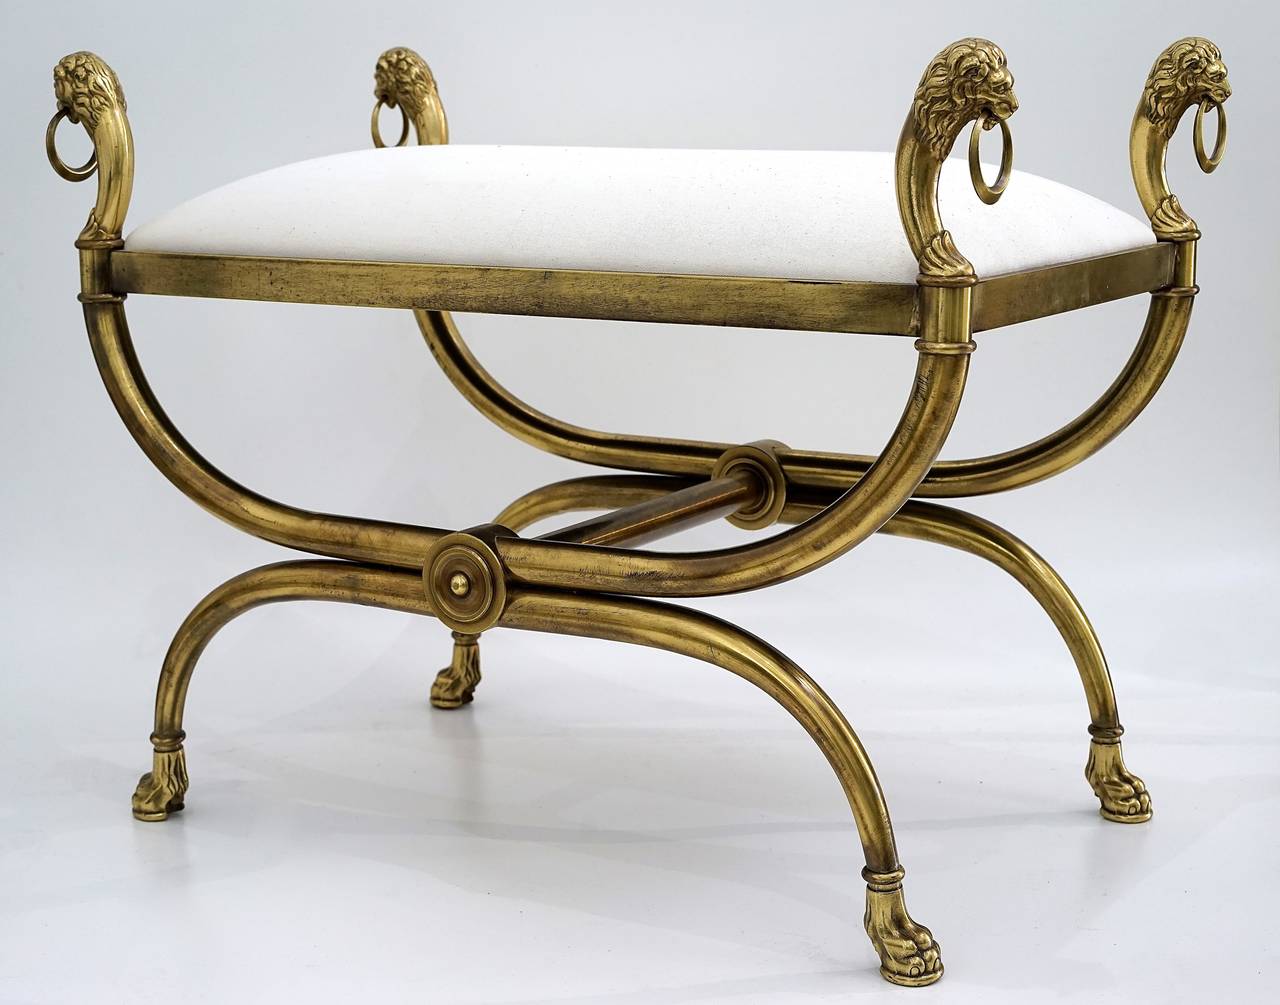 This Mid-Century Curule-Style bench has an elongated X-Frame with lion-paw feet, lion-heads with undulating-manes and each grasping a crescent moon- shaped ring. 

The frame is an antique brass/bronze coloration.

The slip-seat is newly